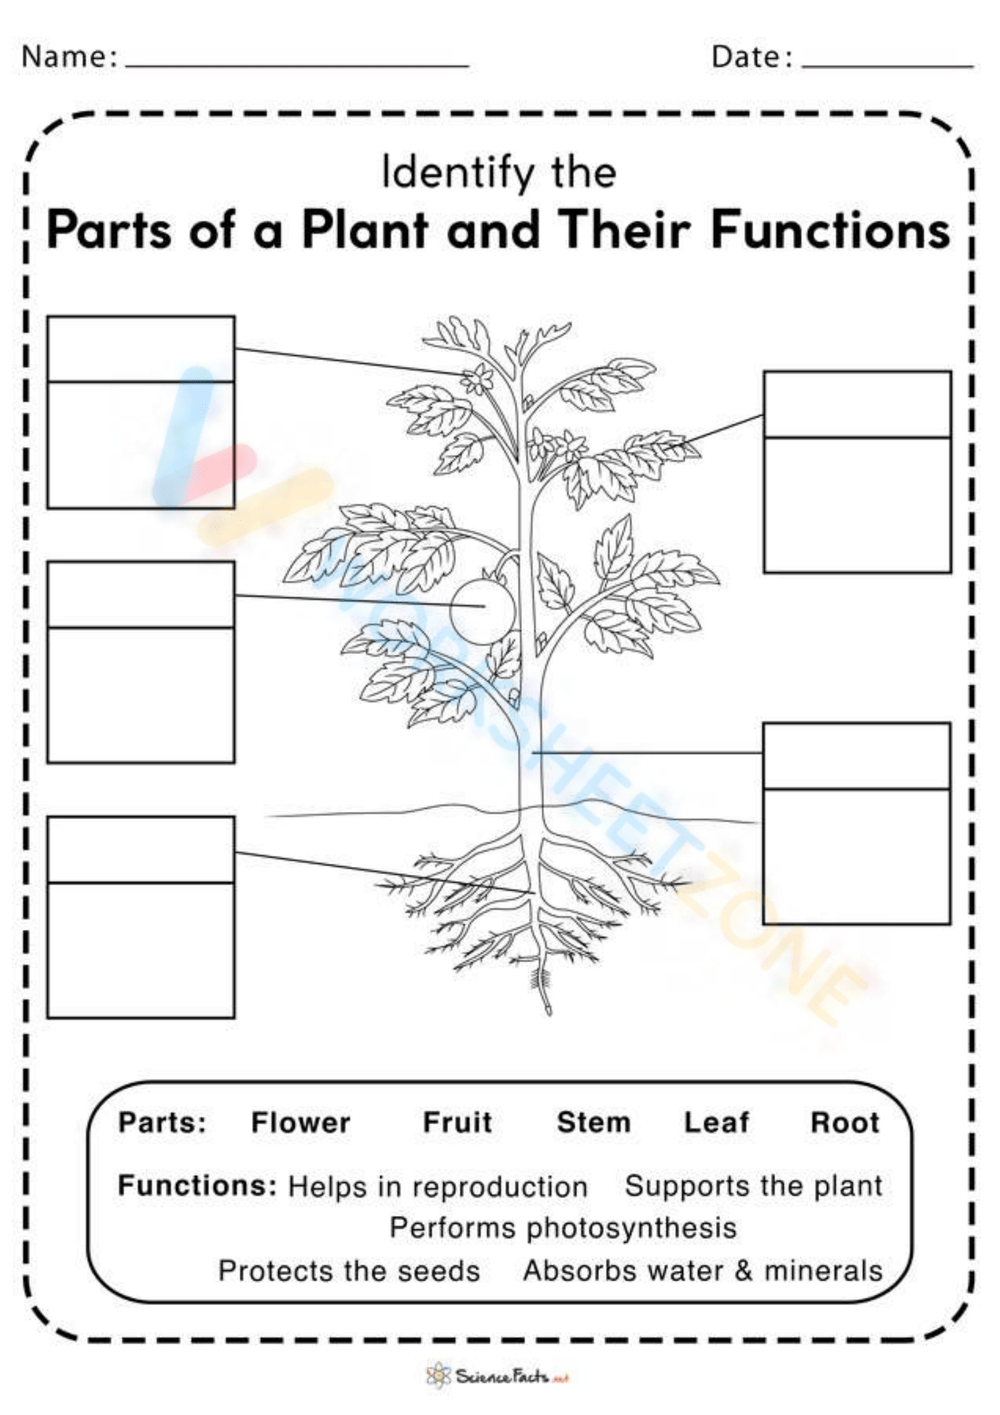 Parts of Plants and Their Functions Worksheet